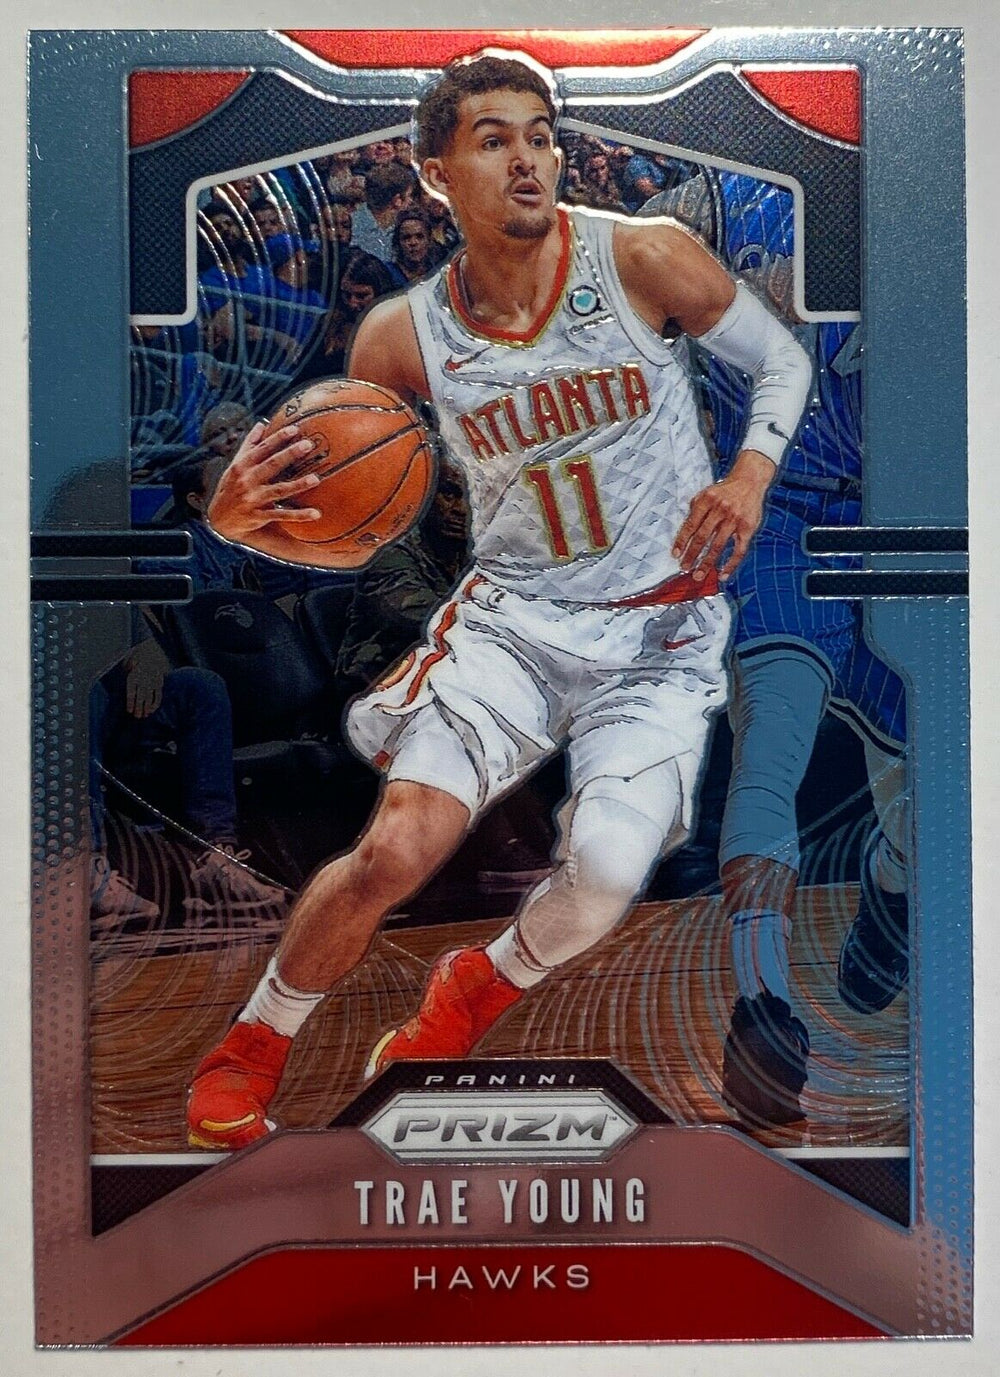 Trae Young 2019 2020 Panini Prizm Series Mint Card #31